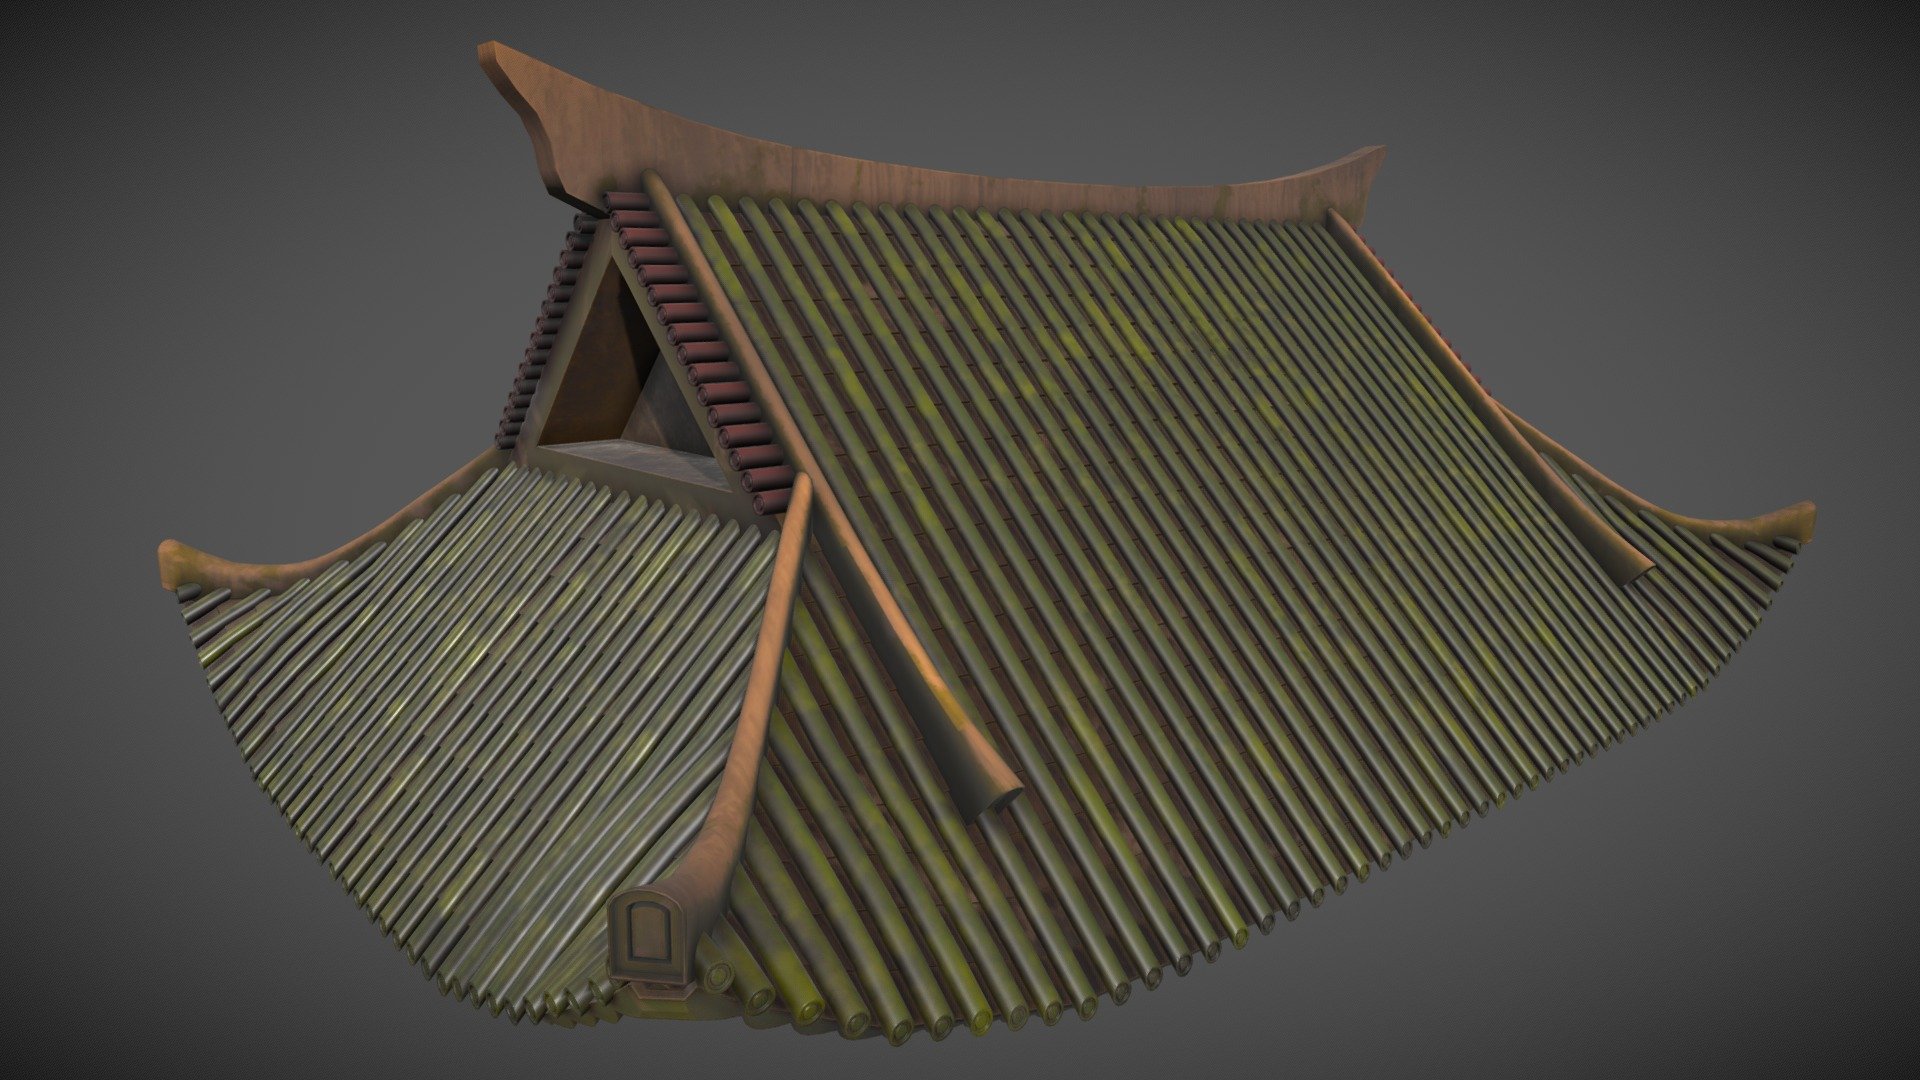 Stylized Feudal Japan Roof. Please, feel free to use it in any way. Likes are much appreciated.

Hope you like it.

Tibor - Stylized Feudal Japan Roof - Download Free 3D model by tiborjanas.art 3d model